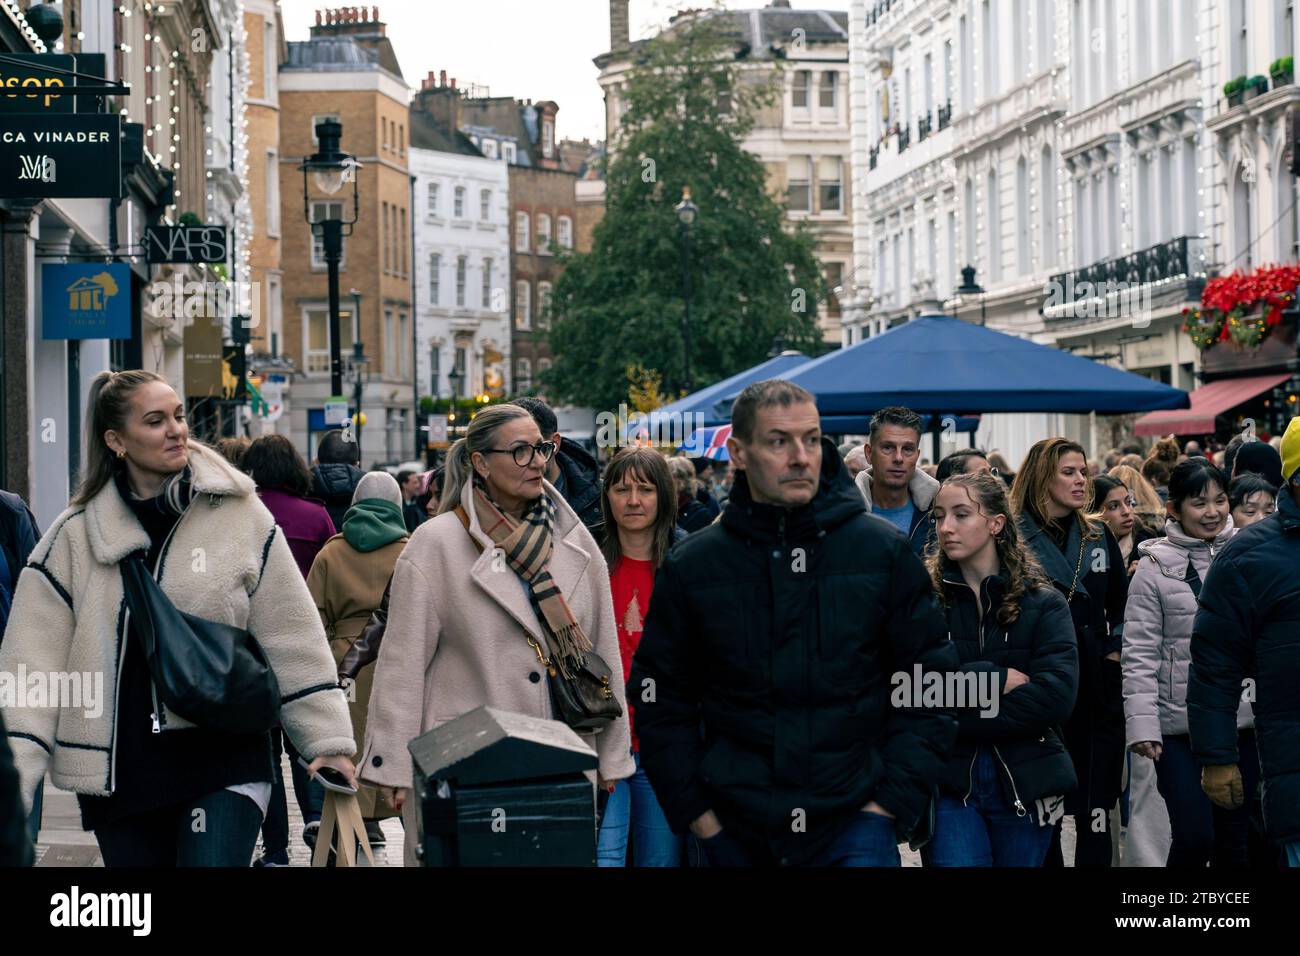 Crowd in London, busy daily life in London, people on the street Stock Photo